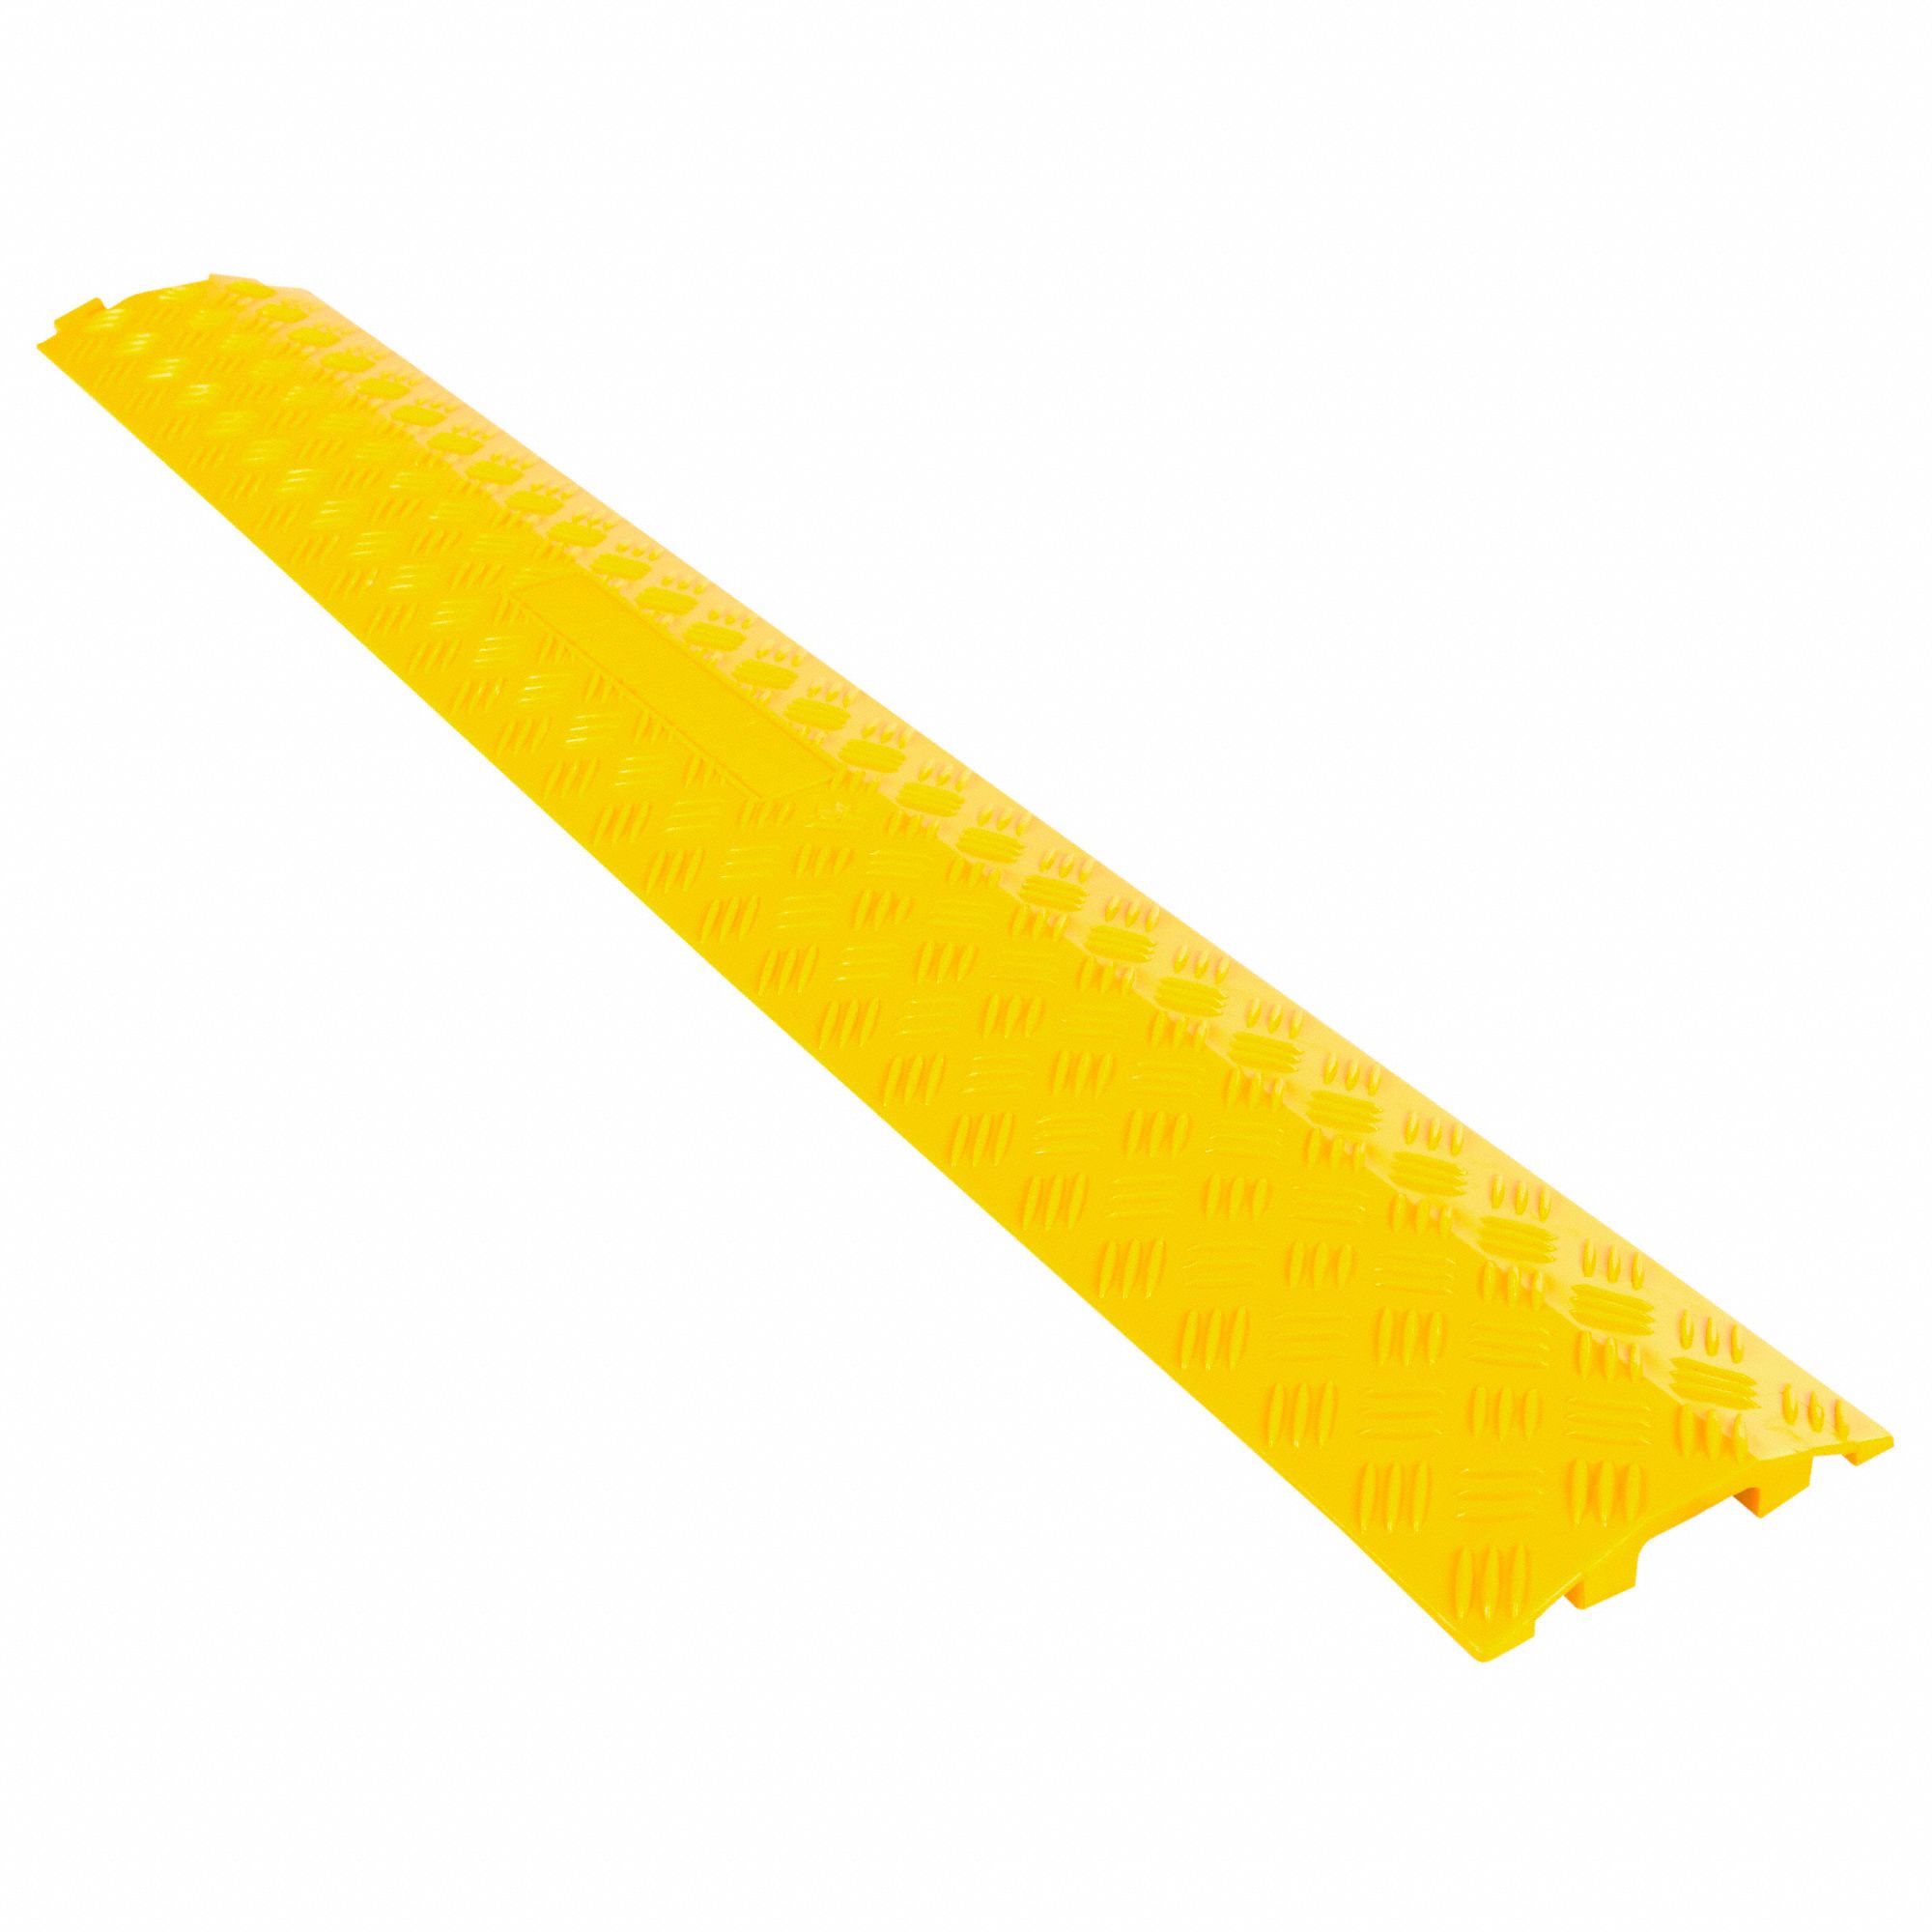 Cable Ramps & Floor Covers - Cable Protectors - Grainger Industrial Supply